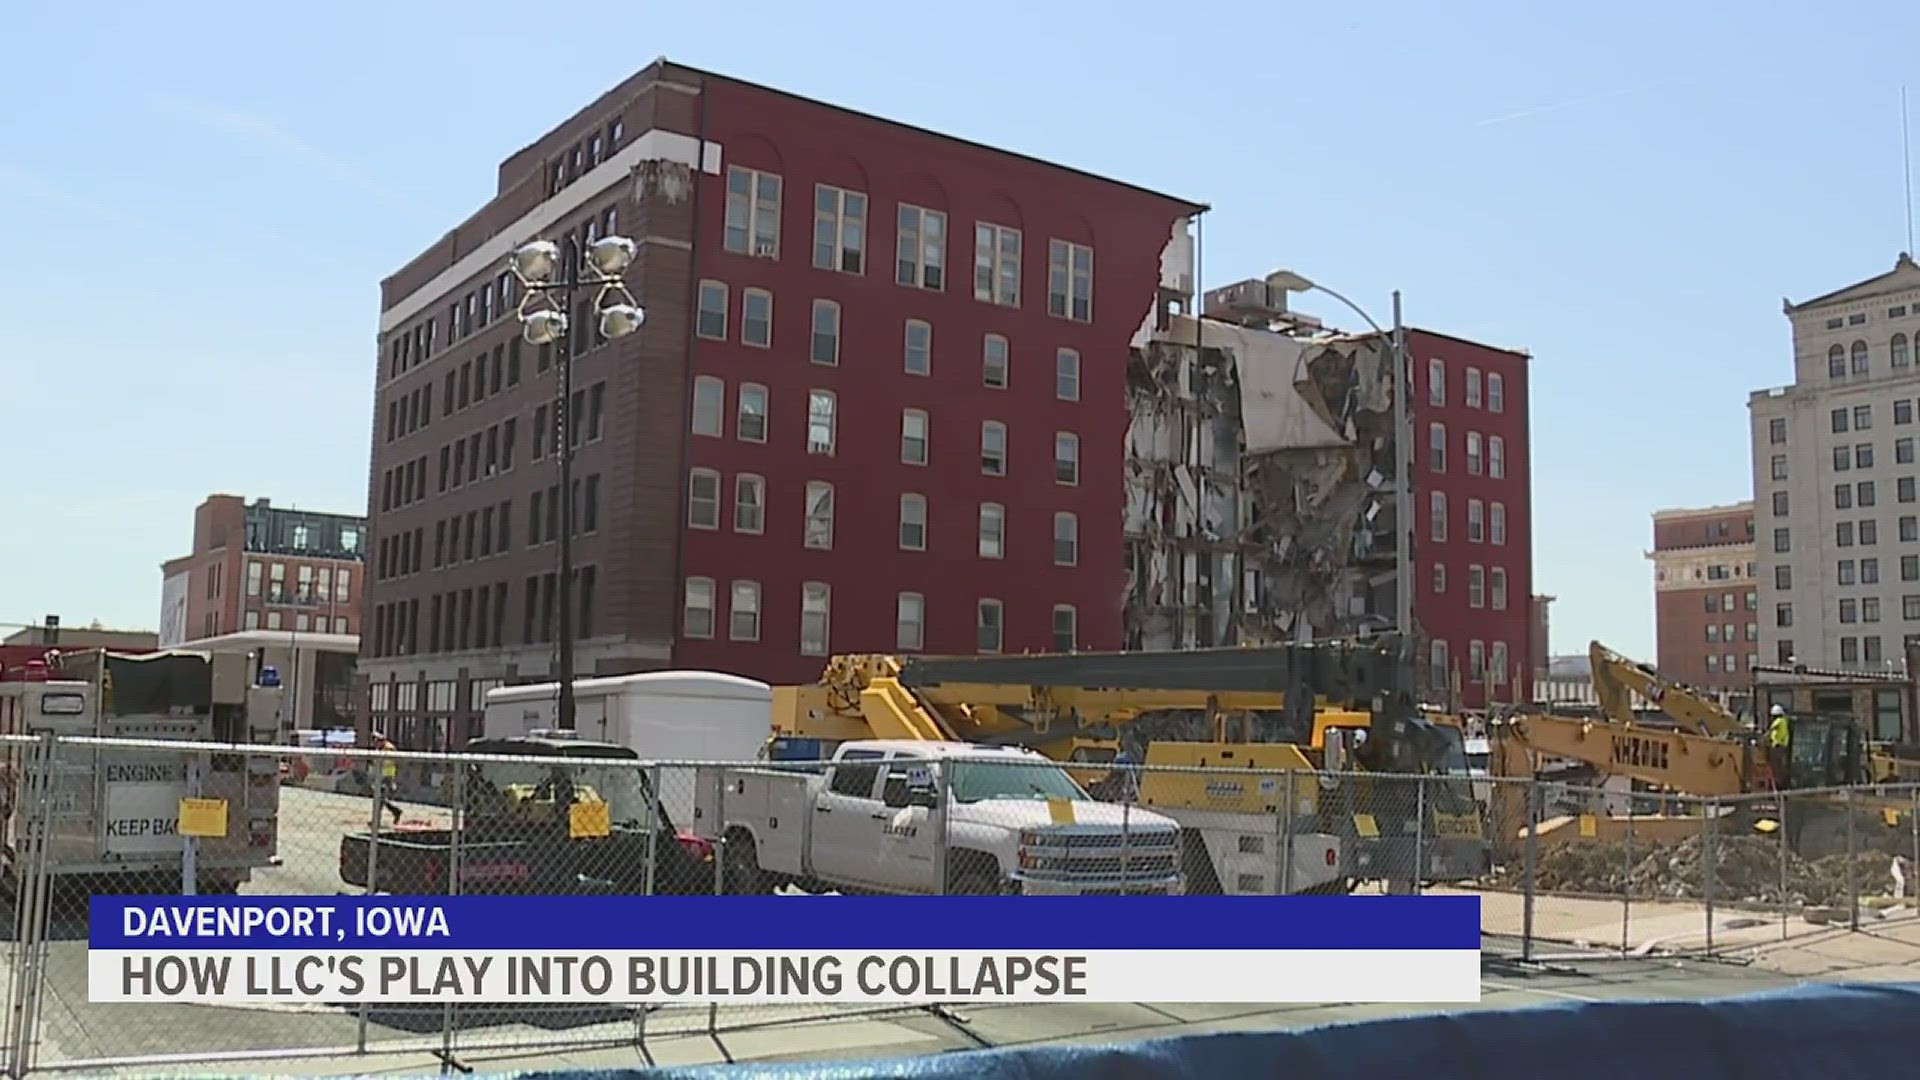 News 8 talked with a real estate lawyer on the ownership layout behind the collapsed building and how liability in a lawsuit might be determined.